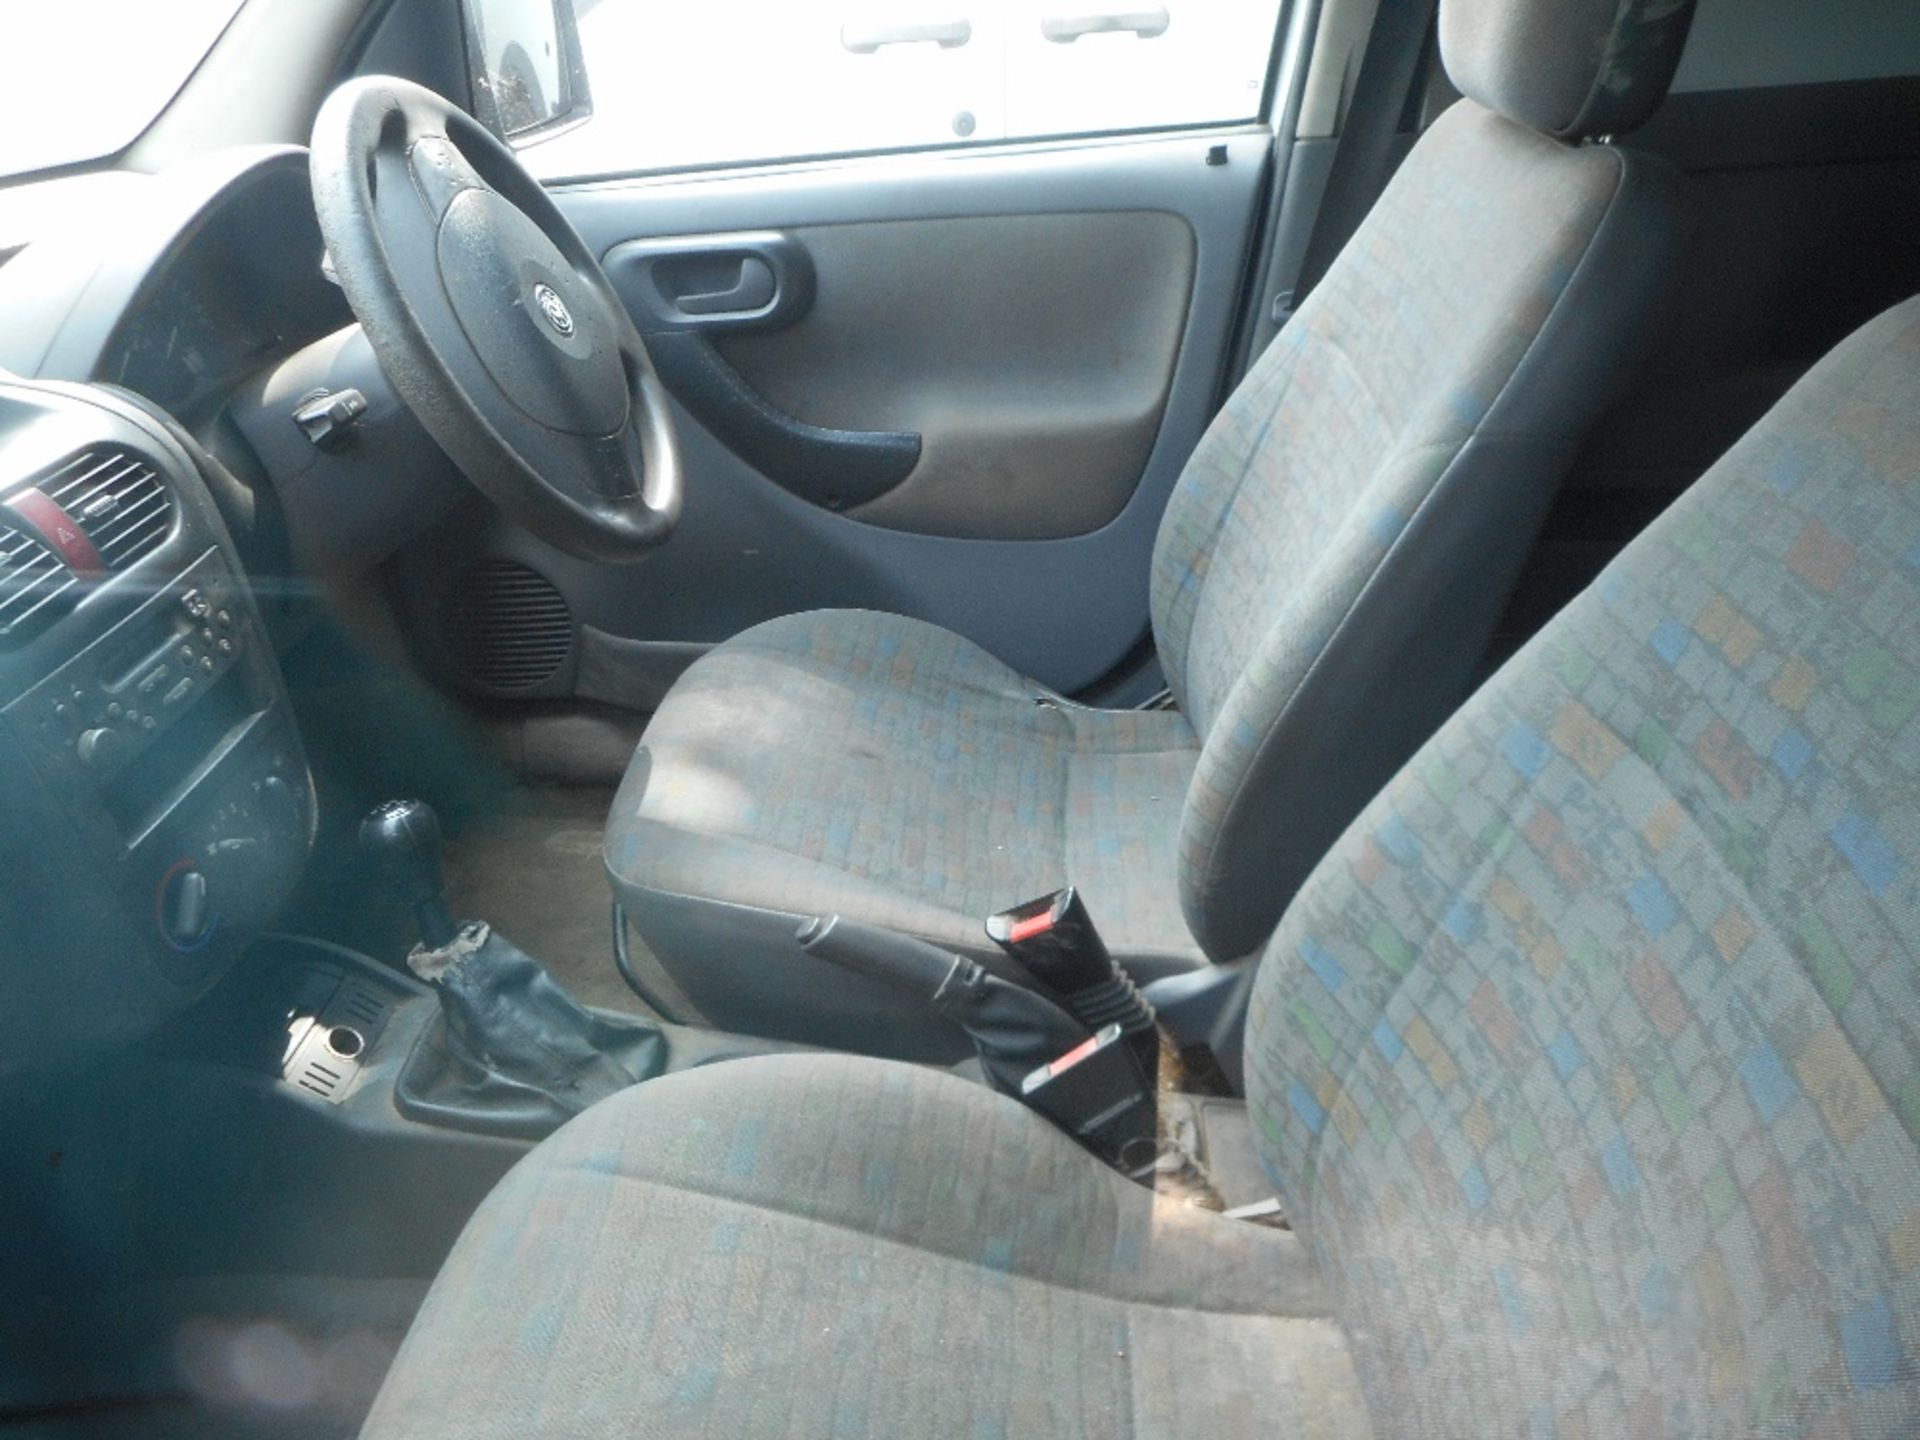 Vauxhall Combo crew van with extra row of seats white year 2004 - Image 9 of 9